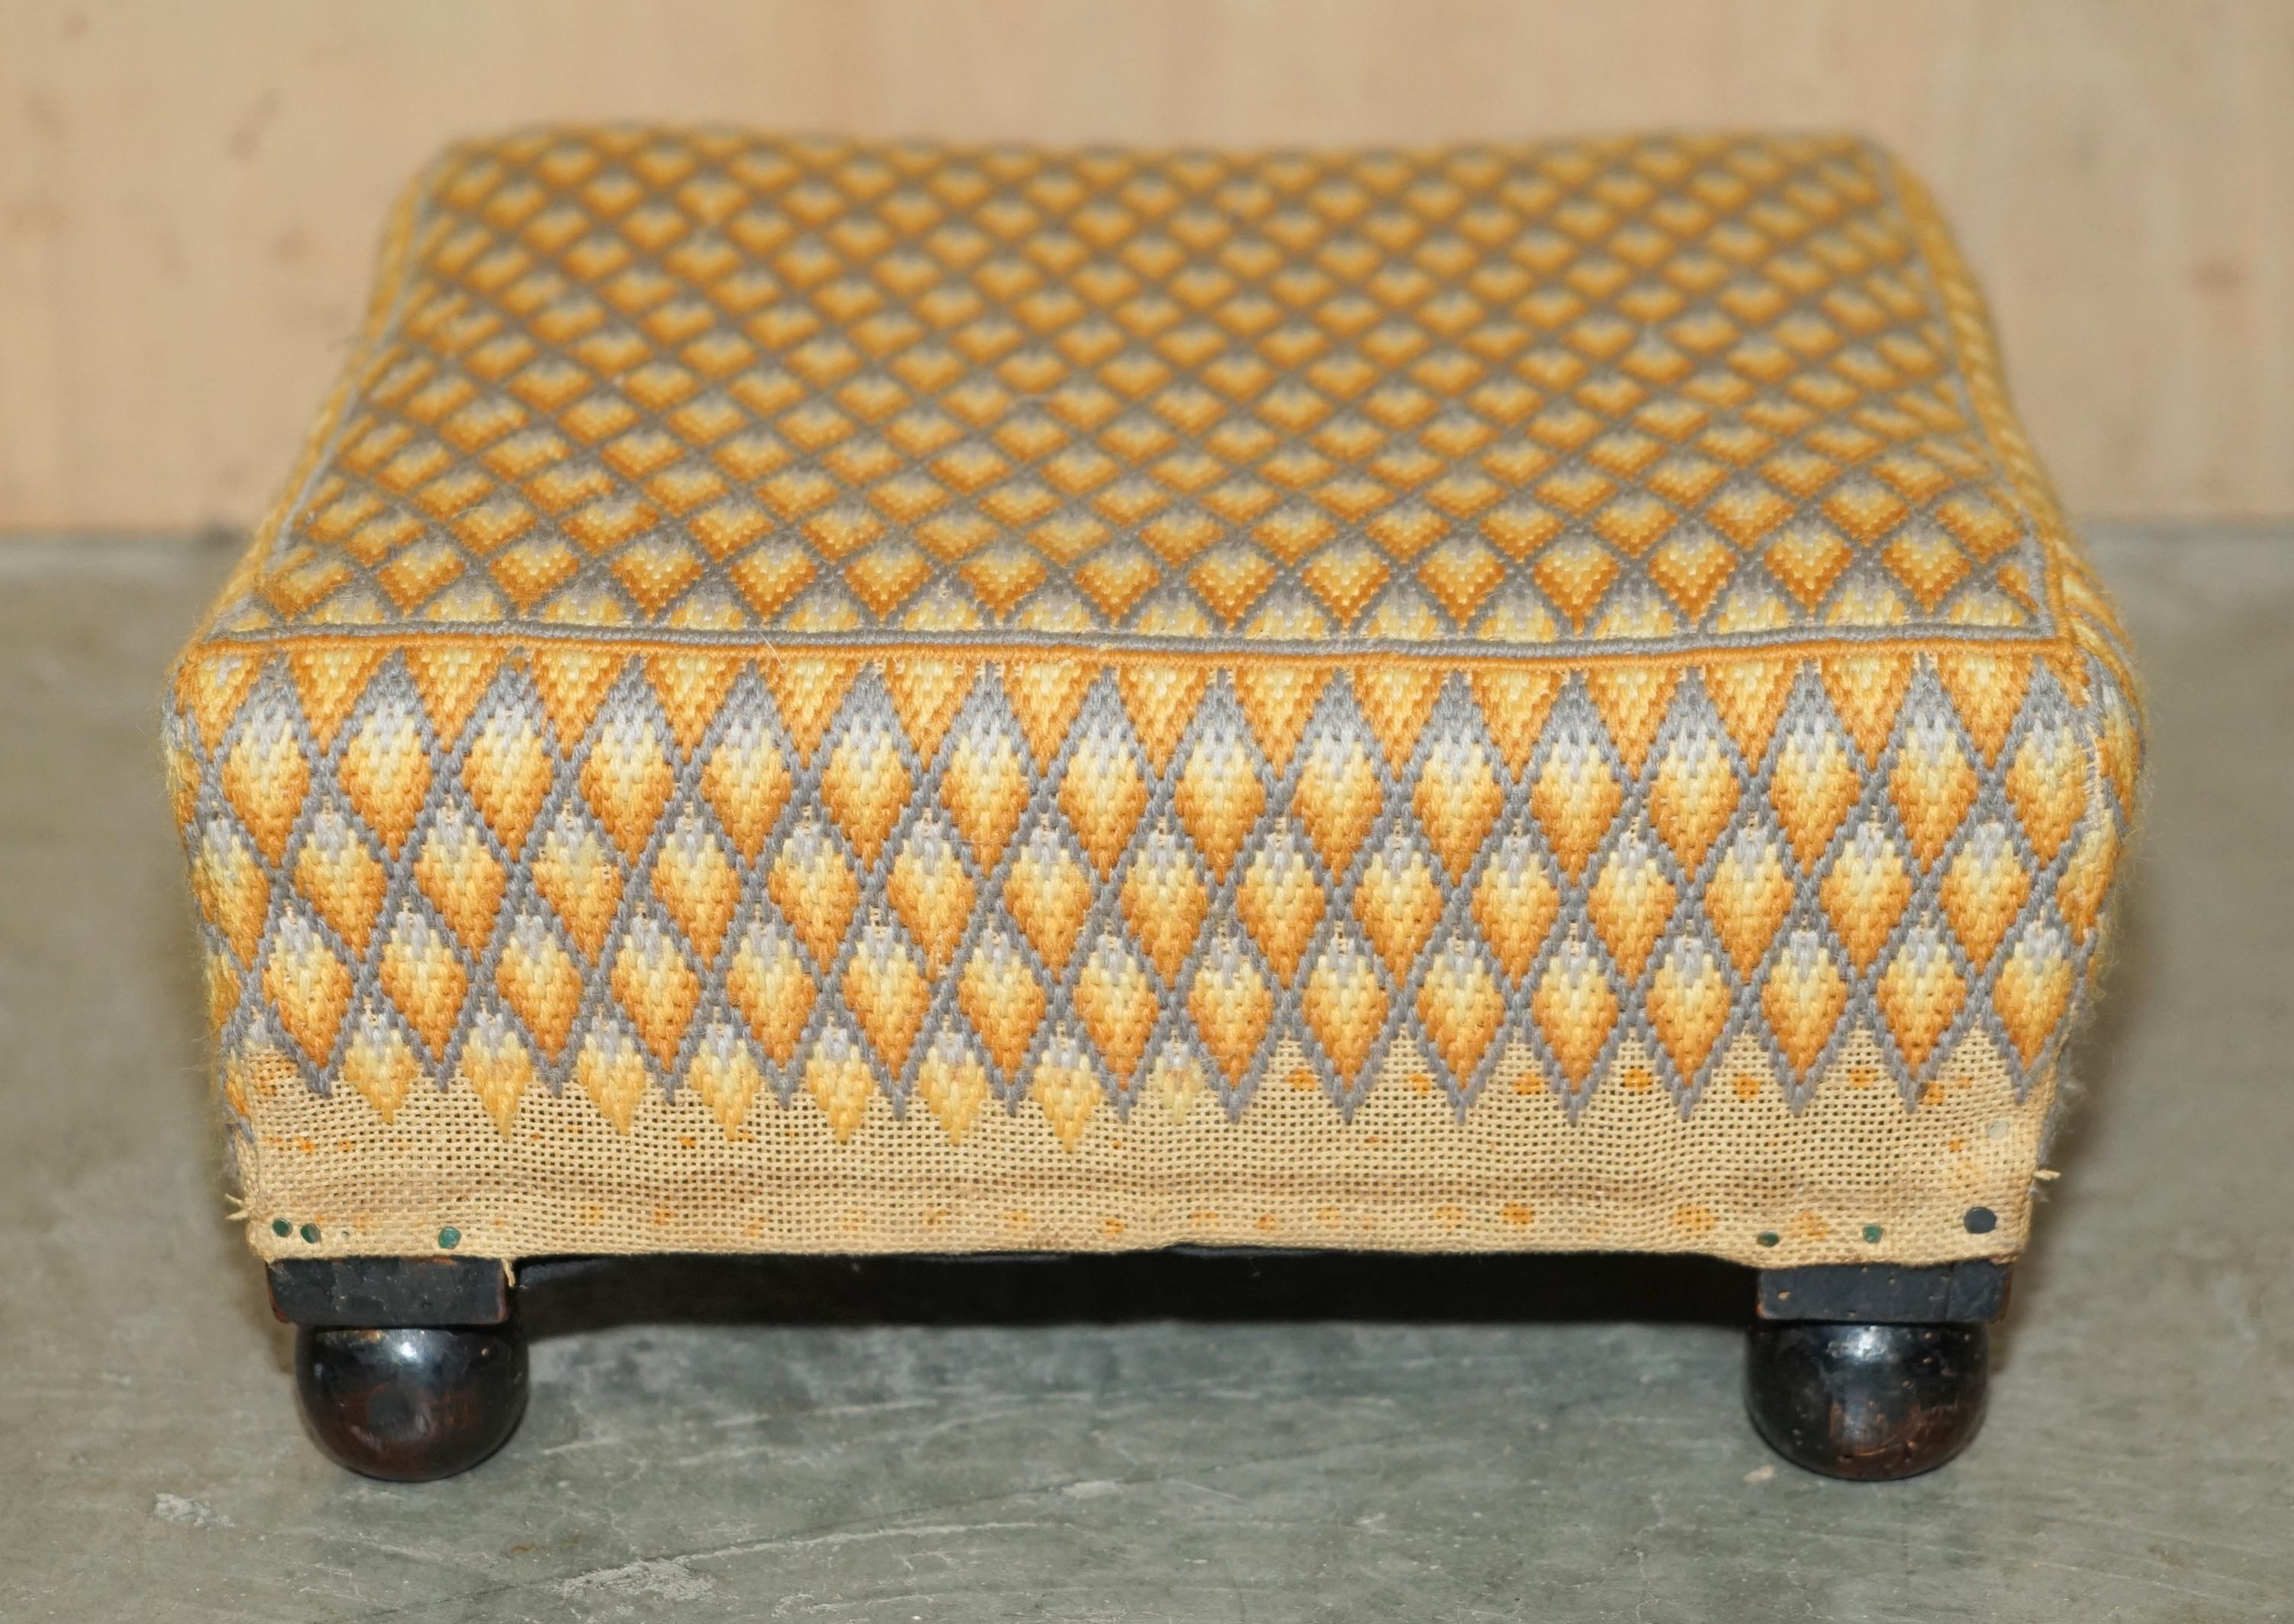 Royal House Antiques

Royal House Antiques is delighted to offer for sale this lovely small English Country House circa 1800's Embroidered footstool designed to go with a wingback armchair

Please note the delivery fee listed is just a guide, it